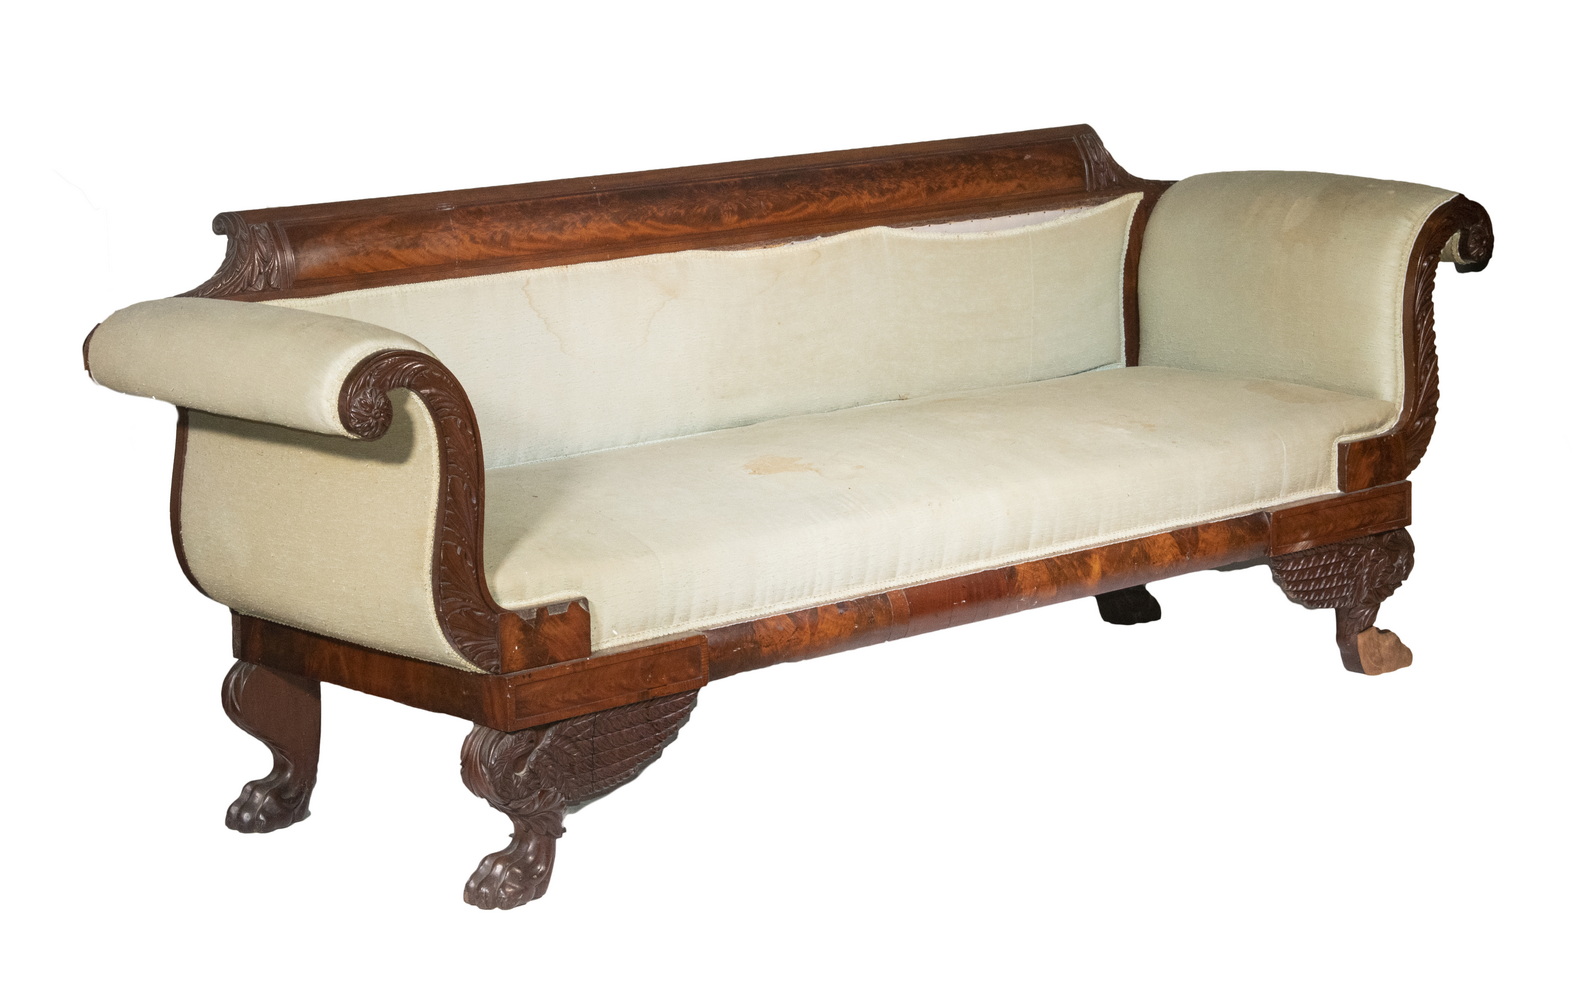 CARVED FEDERAL PERIOD SOFA Early